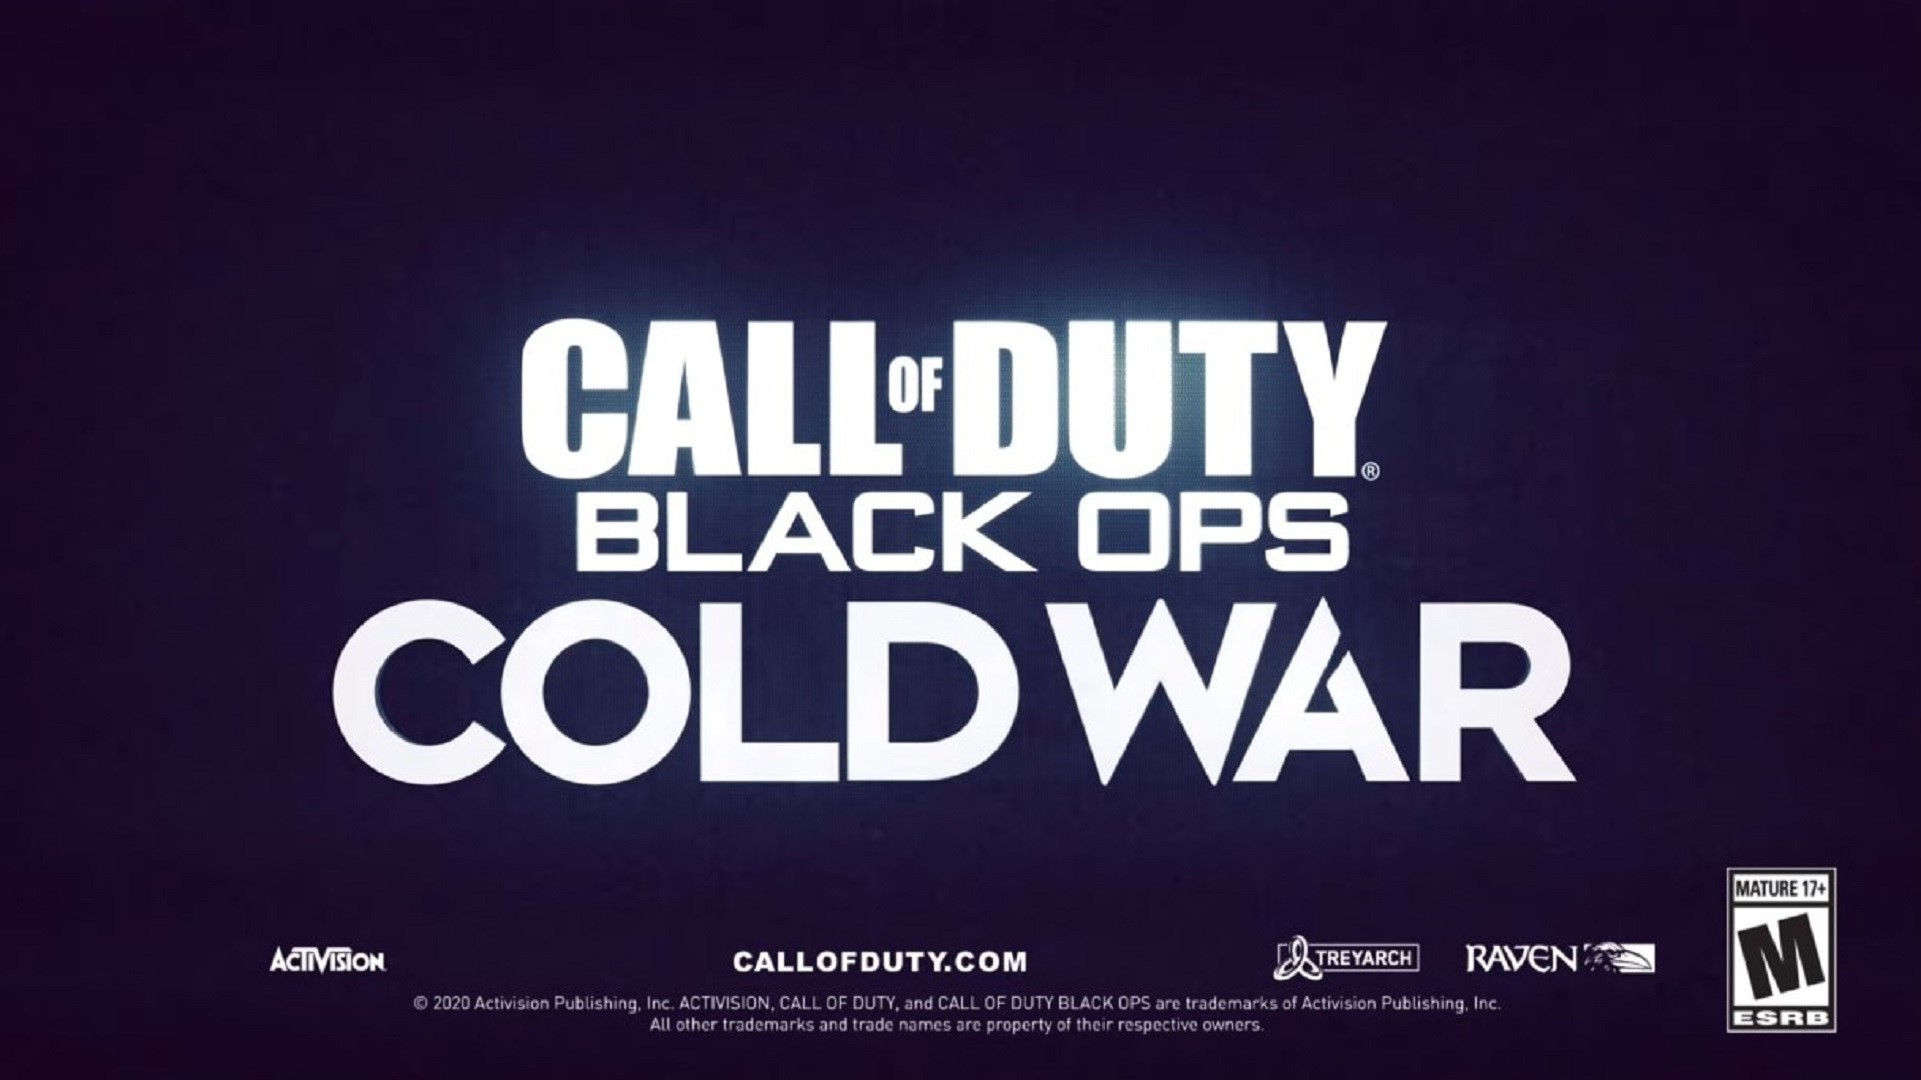 Call of Duty: Black Ops - Cold War out on November 13th No kēia manawa Gen - Rumor